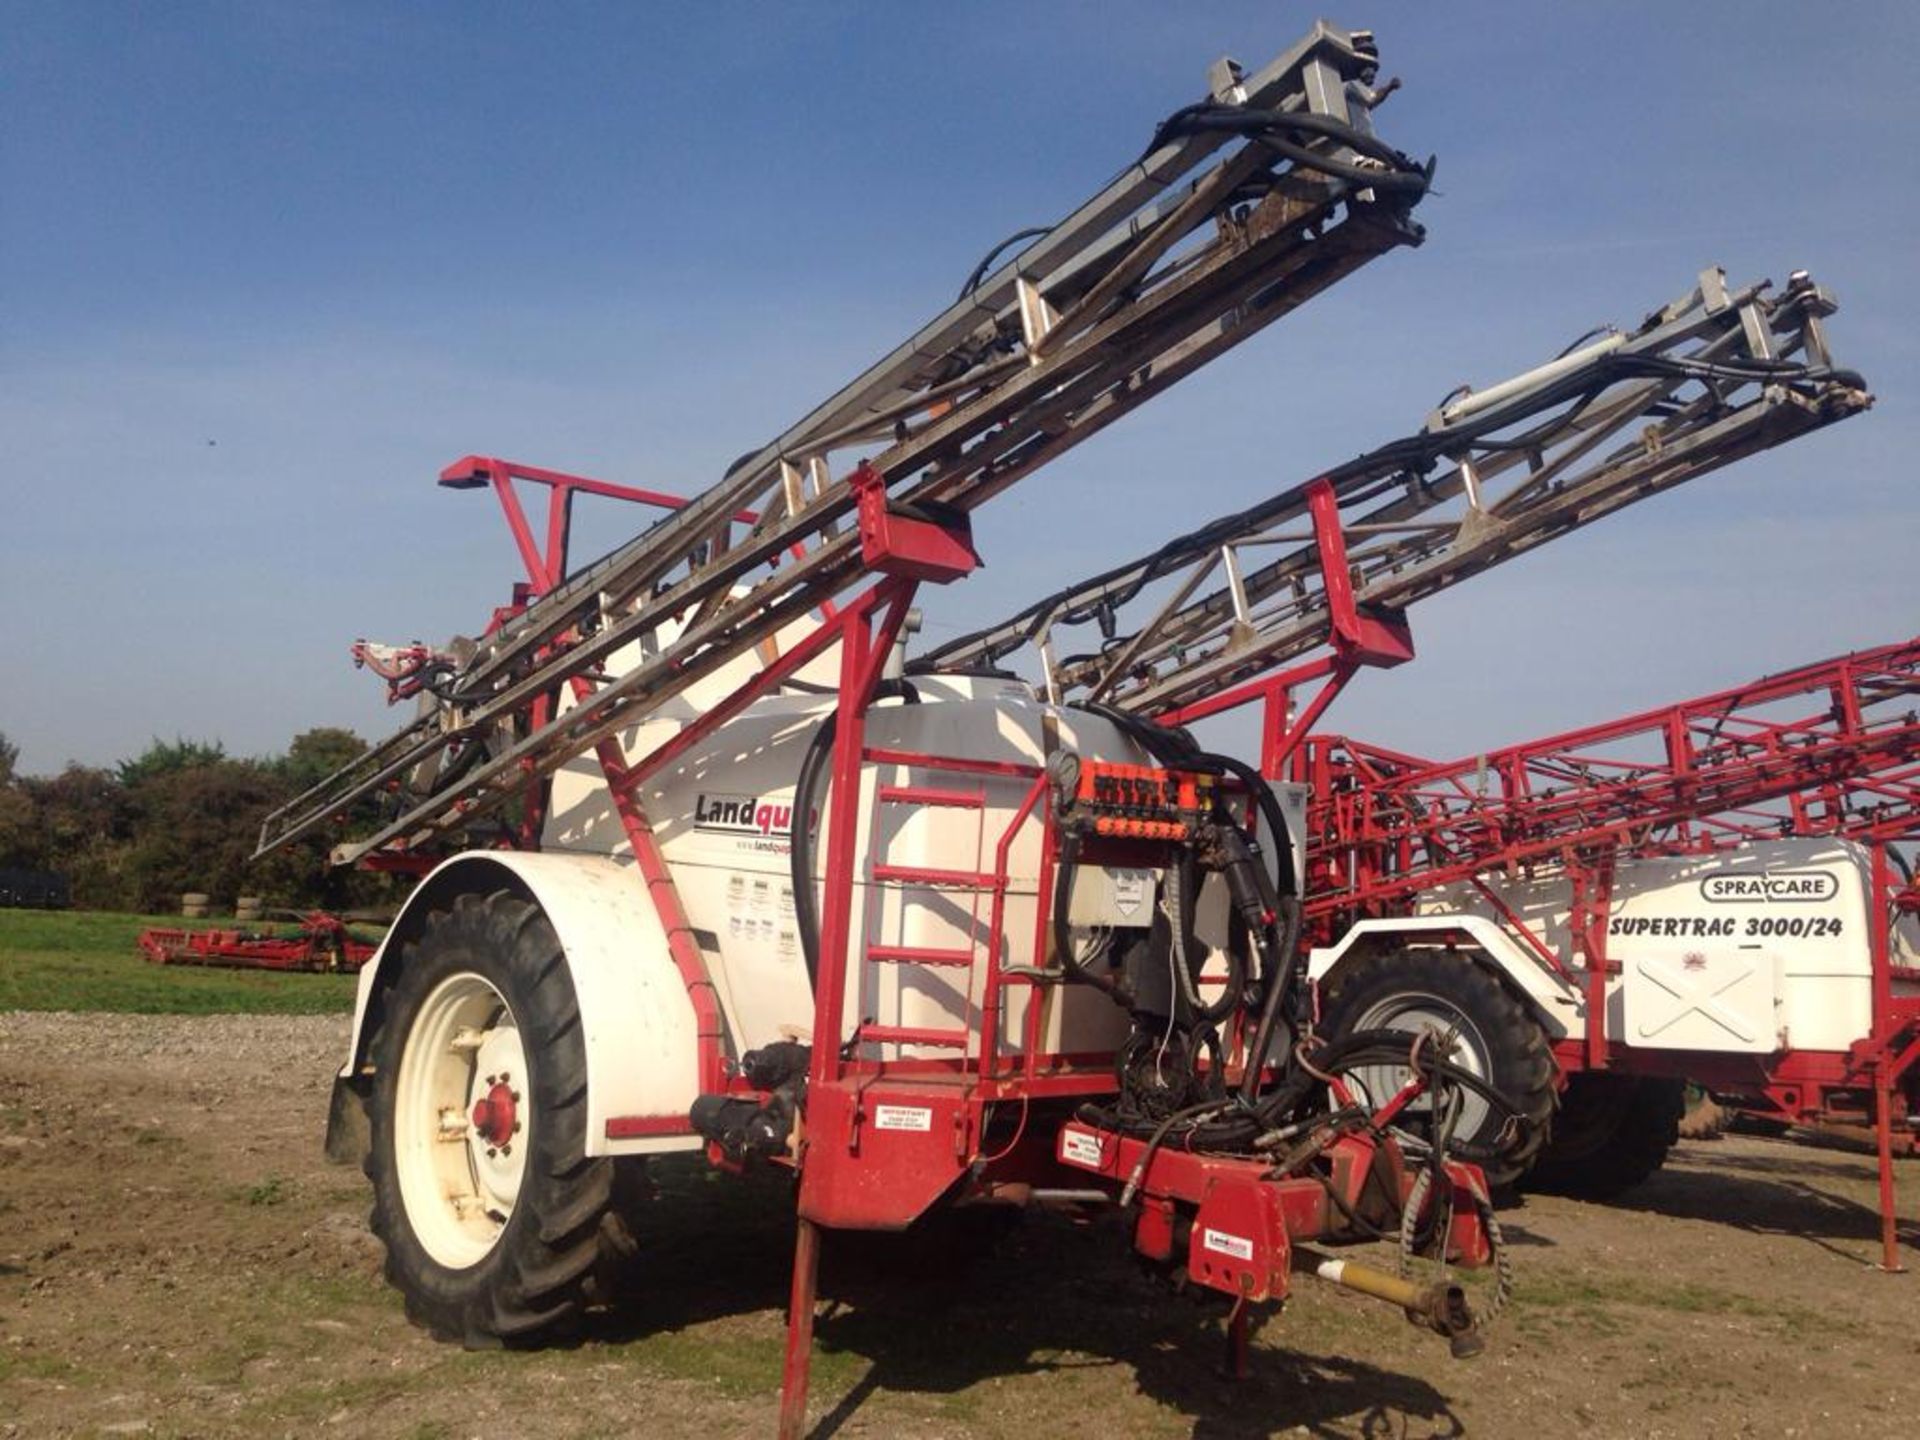 2008 Landquip 3500 Trailed Sprayer, 24m, 3500L Tank, 300L Clean Water, Tracking Steering, 6 Section - Image 4 of 6